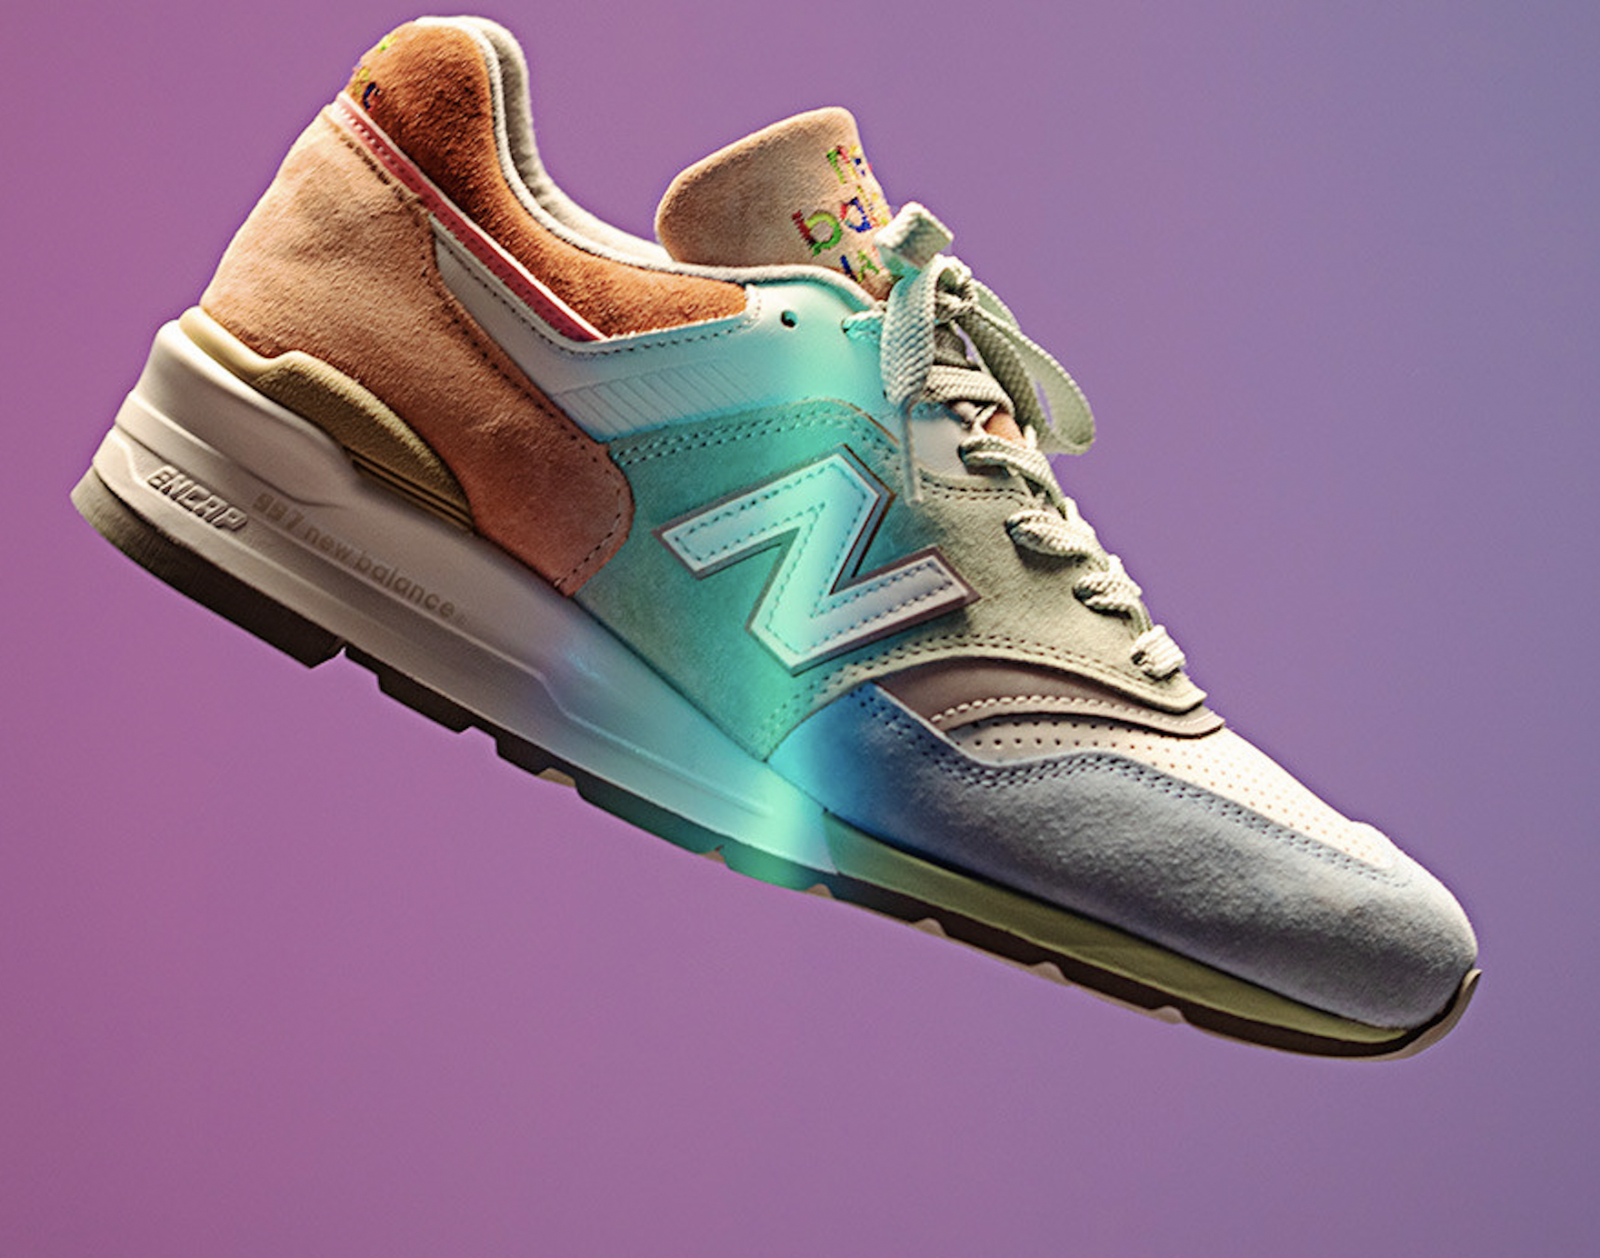 New Balance Claims that Michael Kors is Infringing its Famed Trademarks Via  Lookalike Sneakers - The Fashion Law